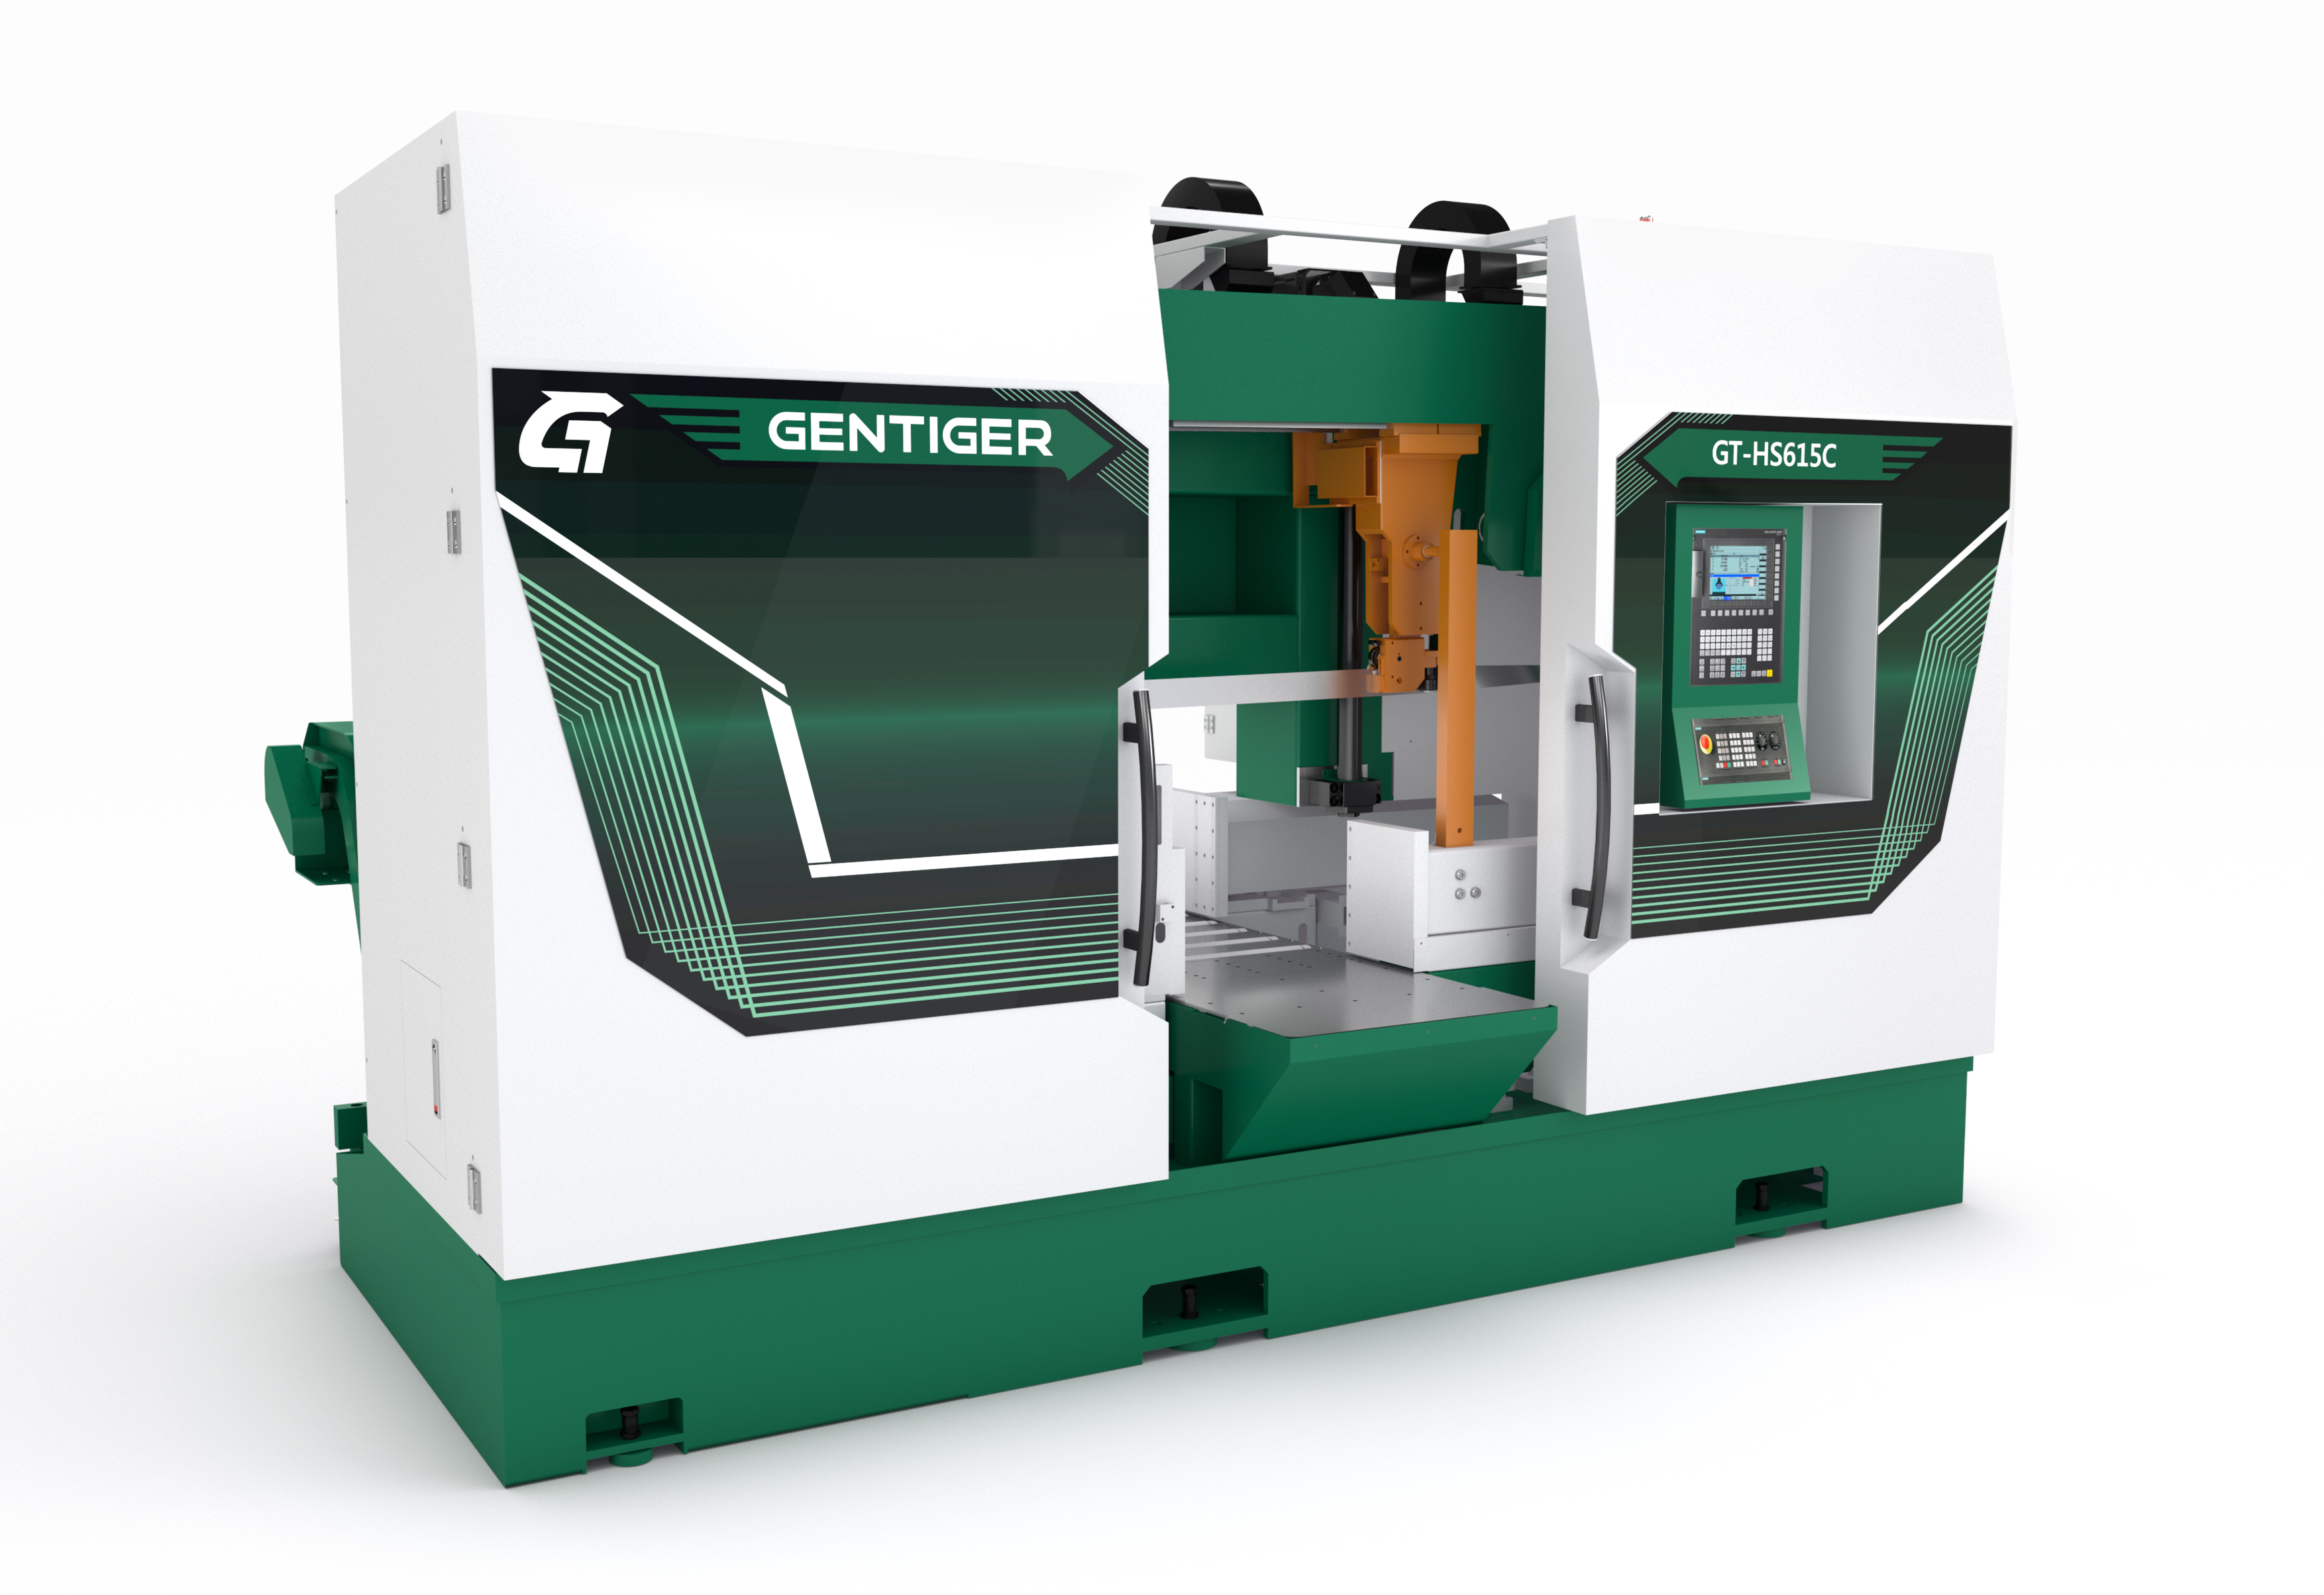 Products|GT-HS615C CNC HIGH SPEED HORIZONTAL BAND SAW MACHING